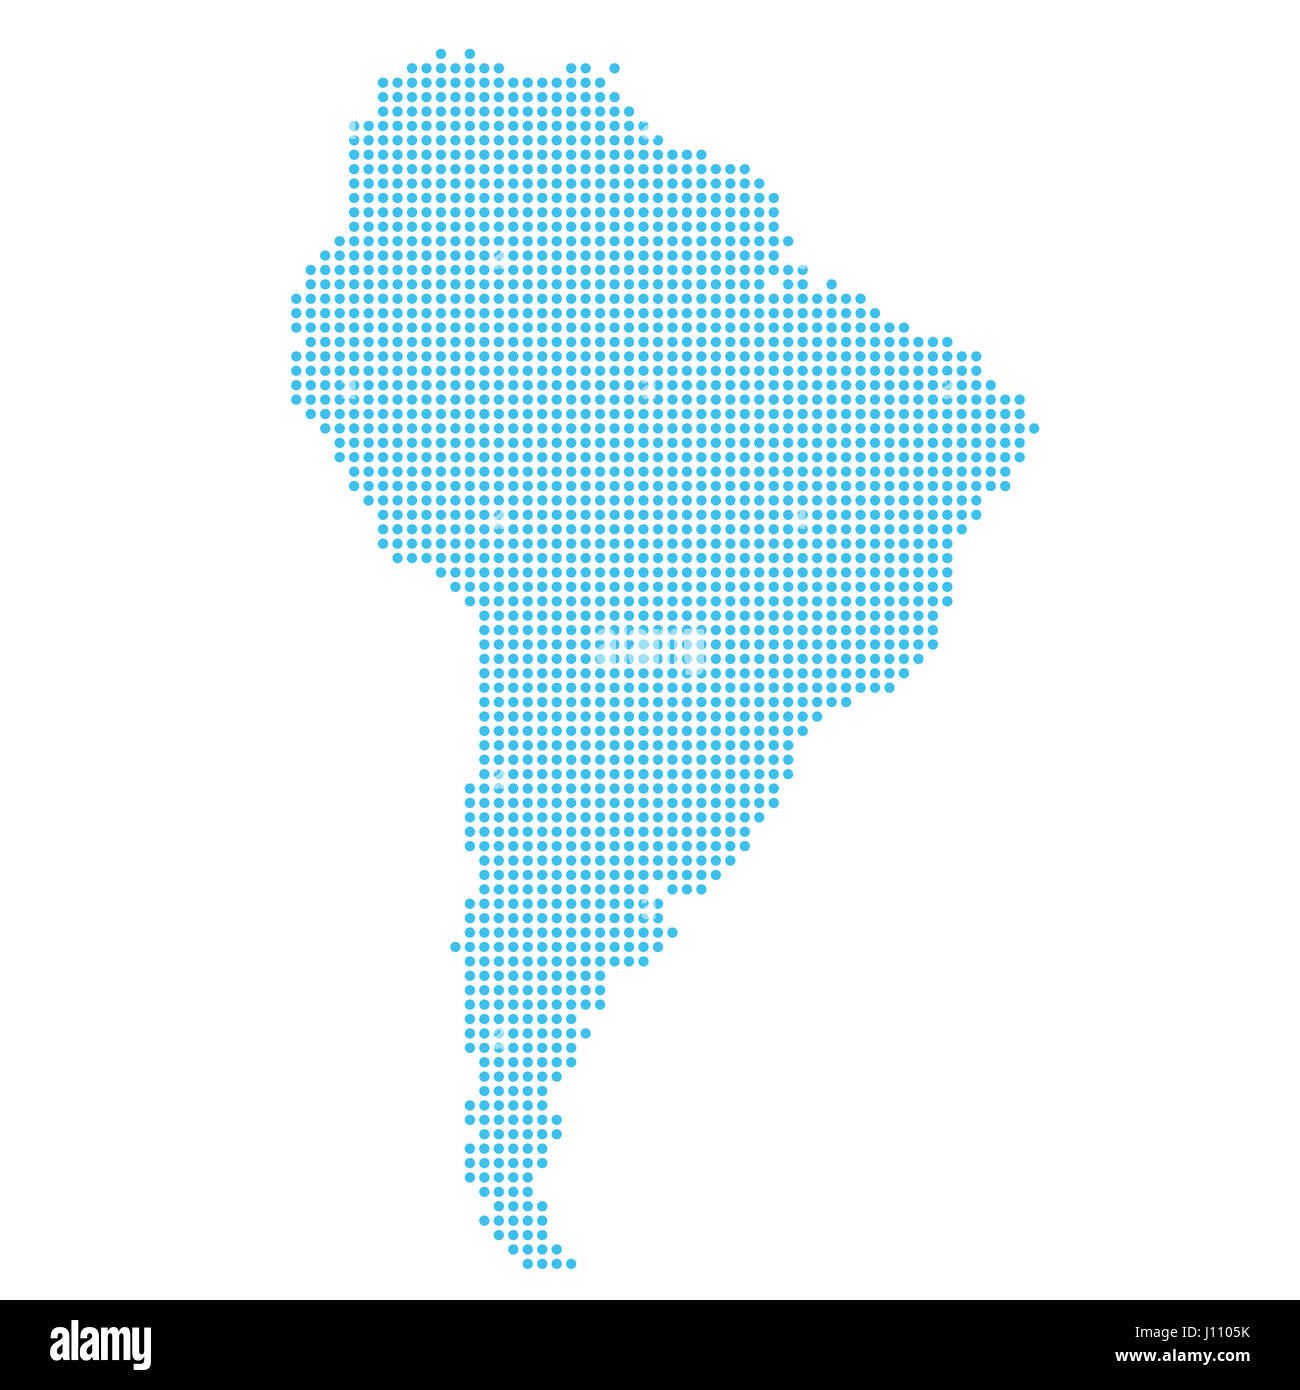 South America made of dots Stock Photo